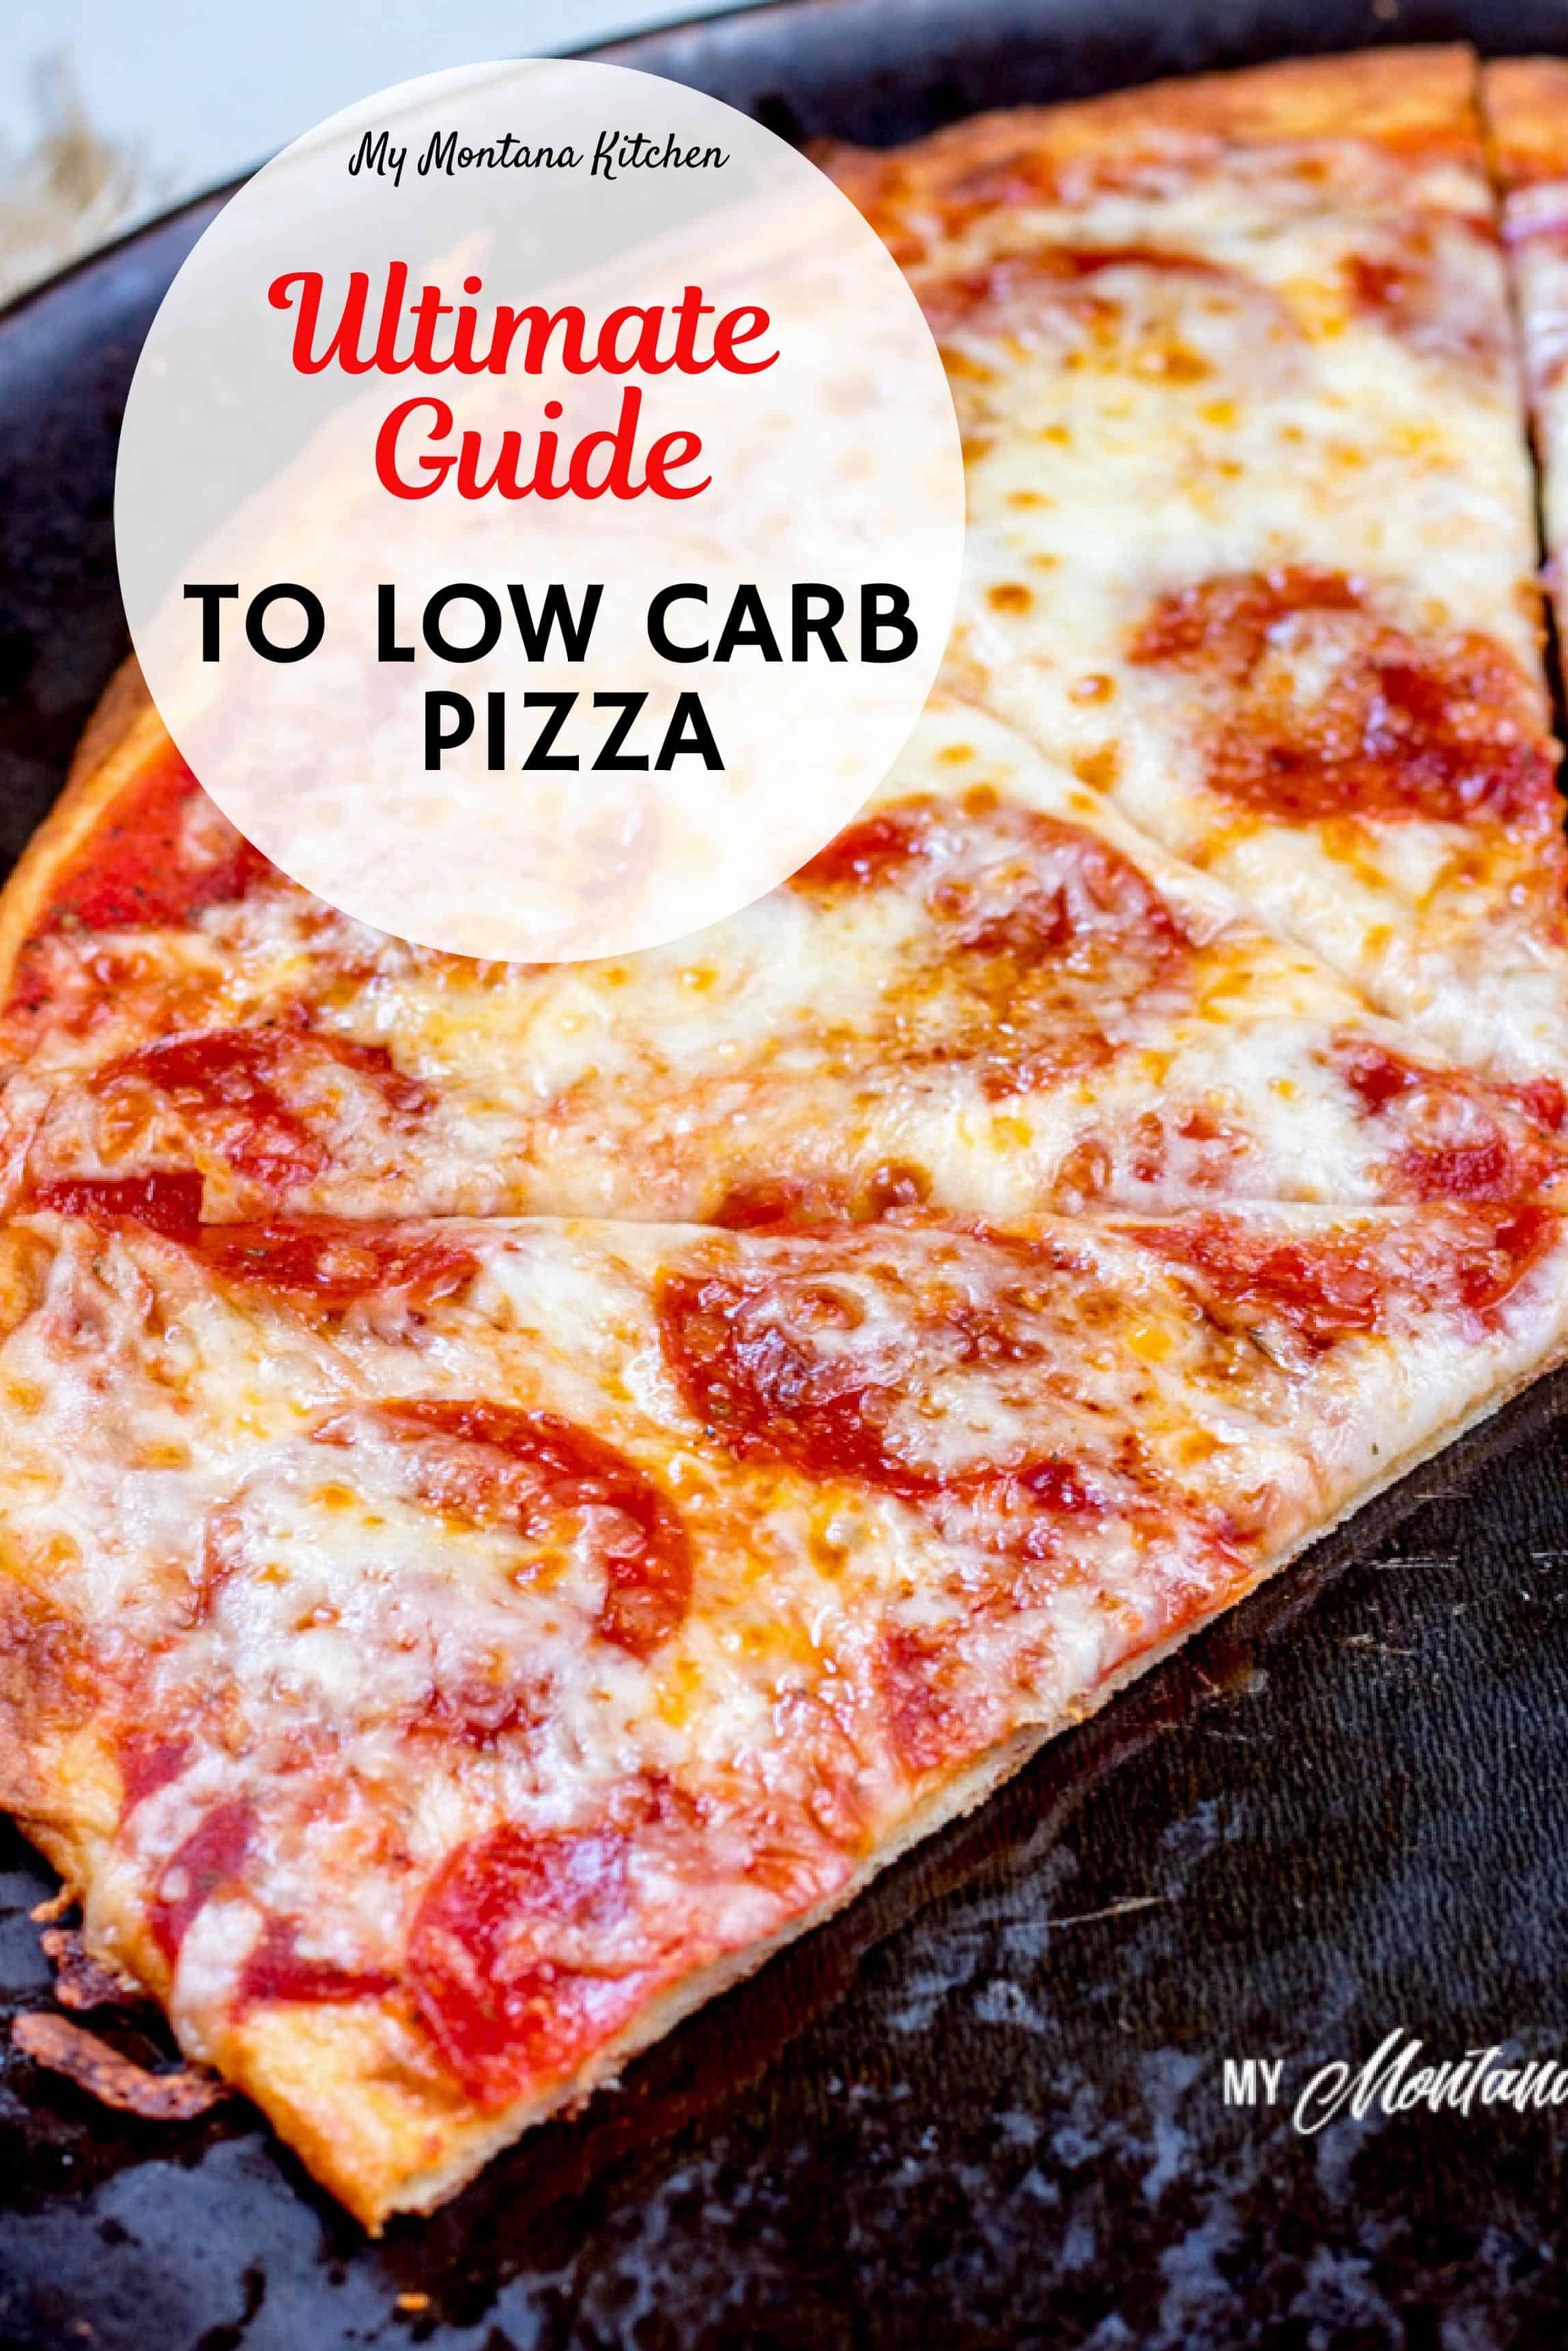 Just because you're living the healthy low carb life doesn't mean you need to sacrifice pizza. You’ll realize just how easy it can be as soon as you learn the 4 steps to the best low carb pizza. This Ultimate Guide To The Best Low Carb Pizza will teach you everything you need to know. #lowcarbpizza #lowcarbguide #nutfreepizza #dairyfreepizzadough #fatheaddough #trimhealthymamapizza #lowcarbpizzarecipes #lowcarbpizzaideas #lowcarb #glutenfree #thmpizza